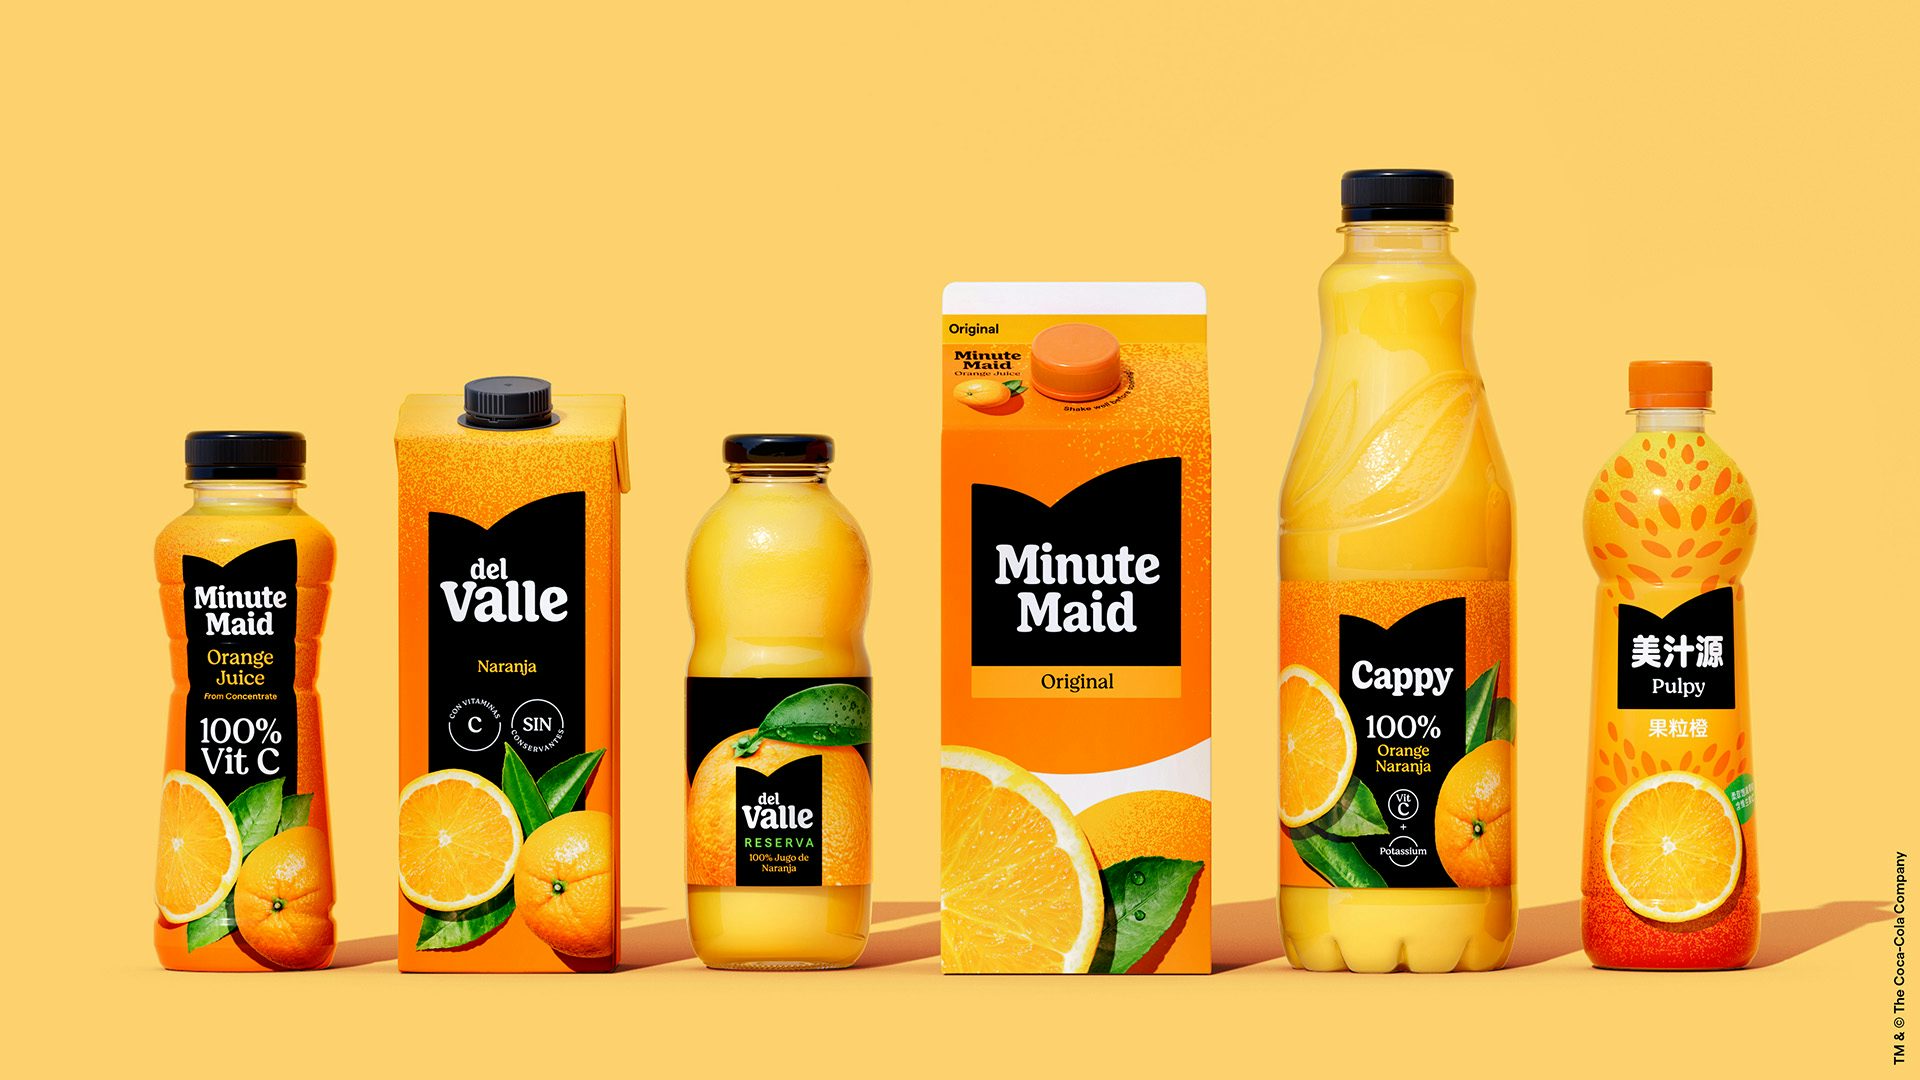 Image showing the new Minute Maid branding and packaging on a line-up of six different orange drinks products